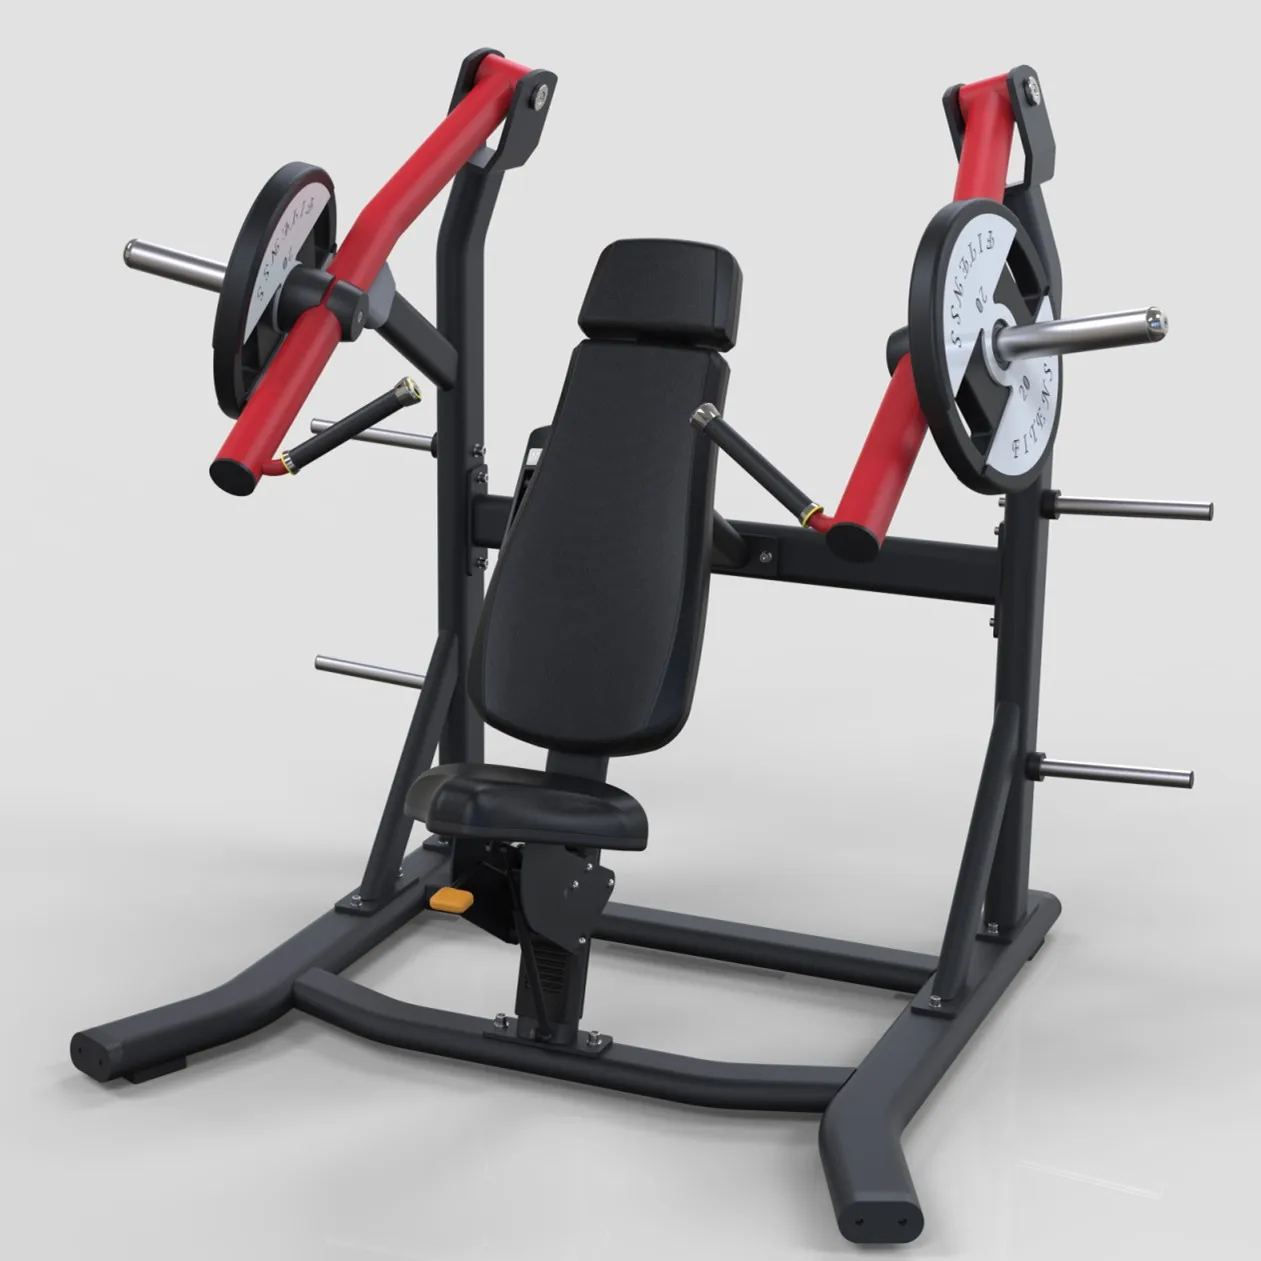 Fitness Sport Free Weight Commercial Gym Equipment Super Incline Bench Press For Sale Gym Buy Incline Bench Press Machine